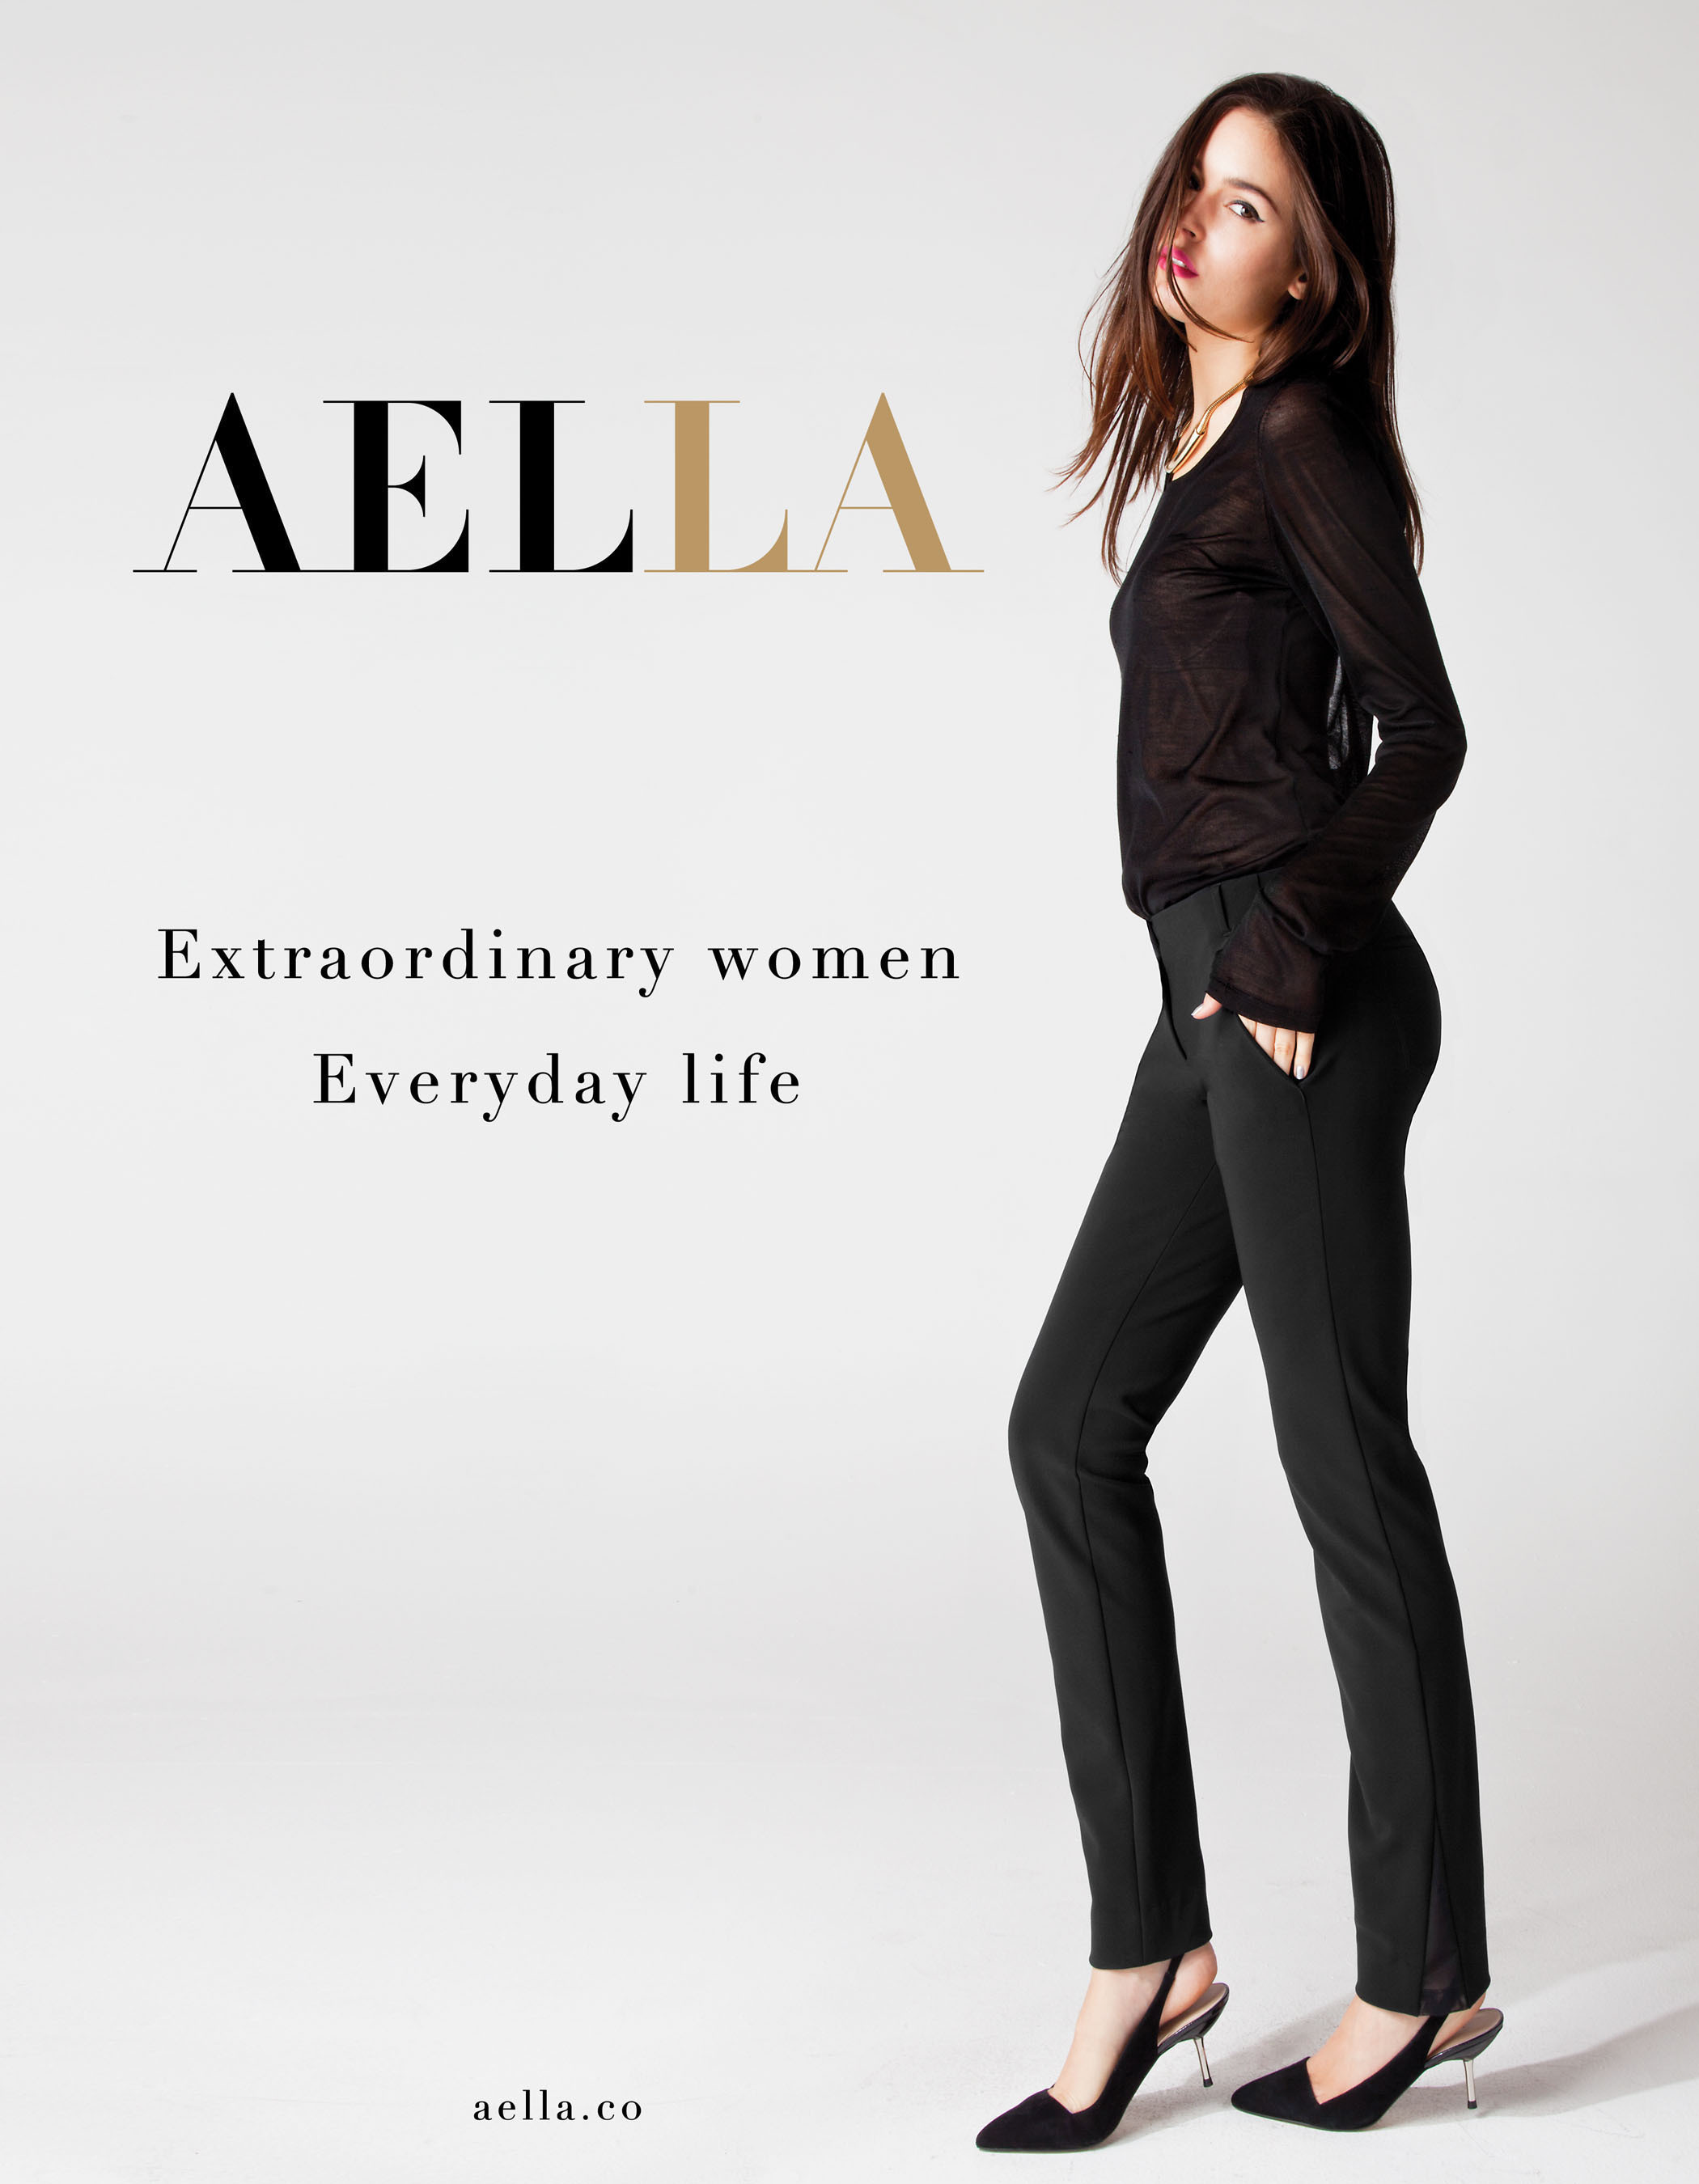 Launch Of AELLA Collection Reminds Us That Women Wear The Pants